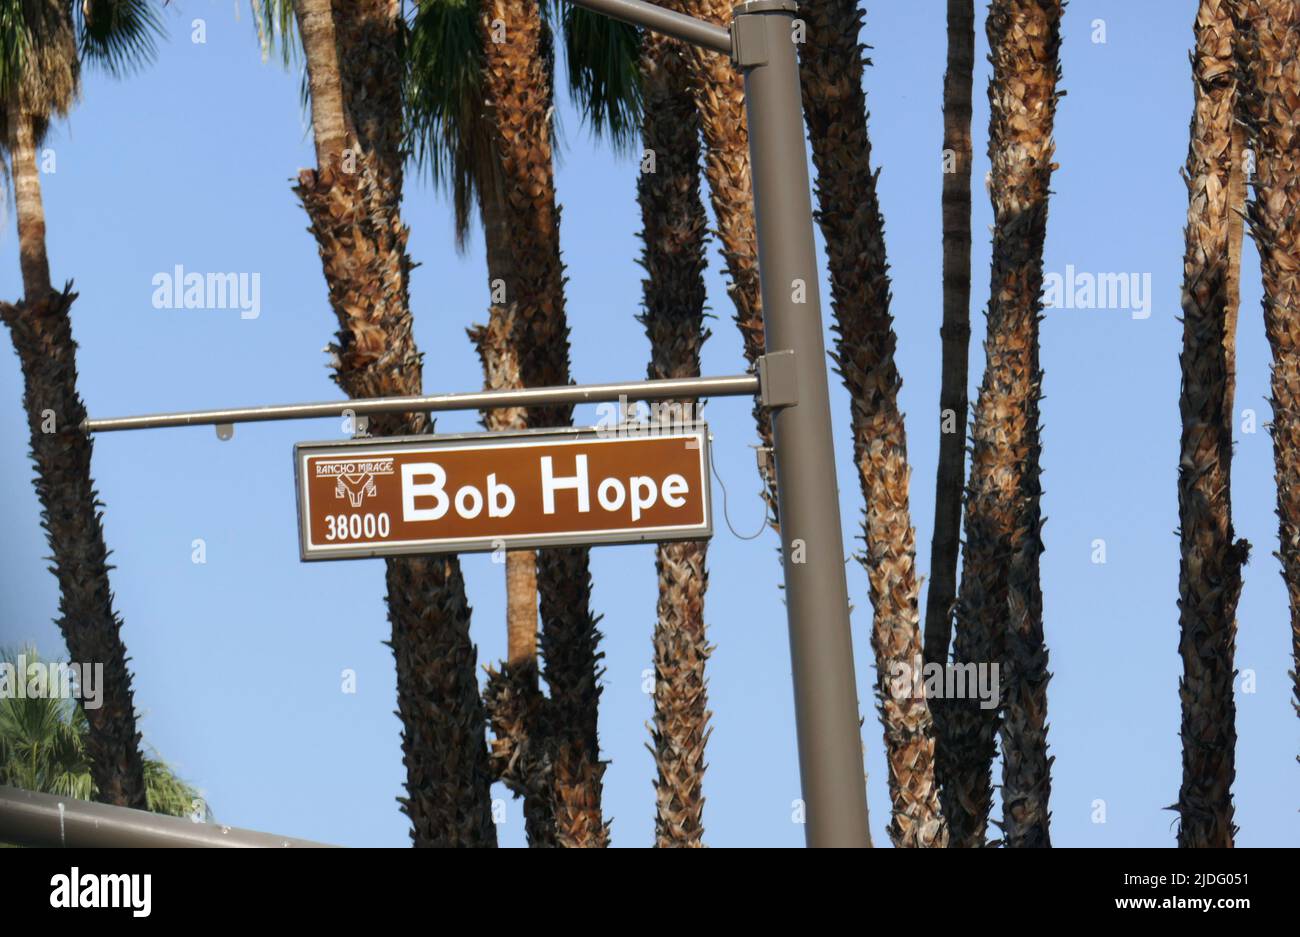 Palm Springs, California, USA 11th June 2022 A general view of atmosphere of Bob Hope Drive on June 11, 2022 in Palm Springs, California, USA. Photo by Barry King/Alamy Stock Photo Stock Photo